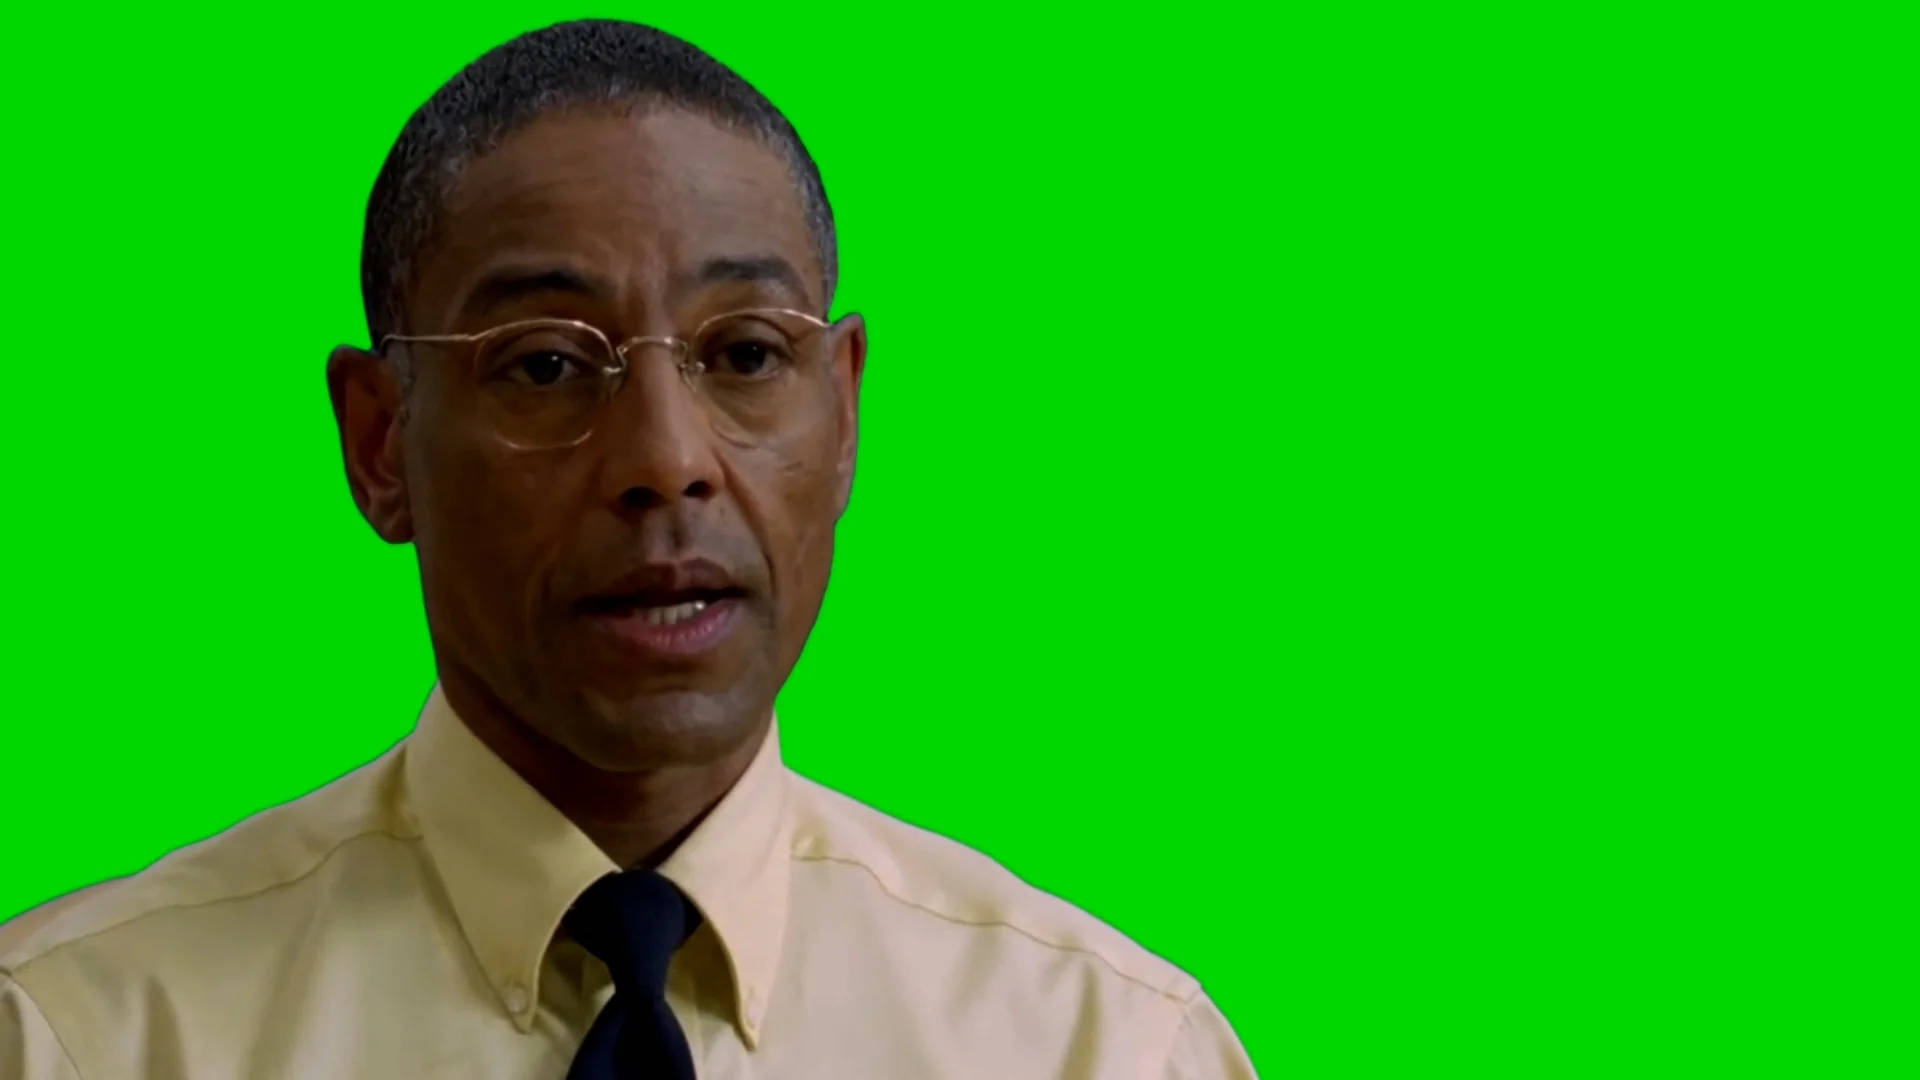 Pin on Gus fring icons